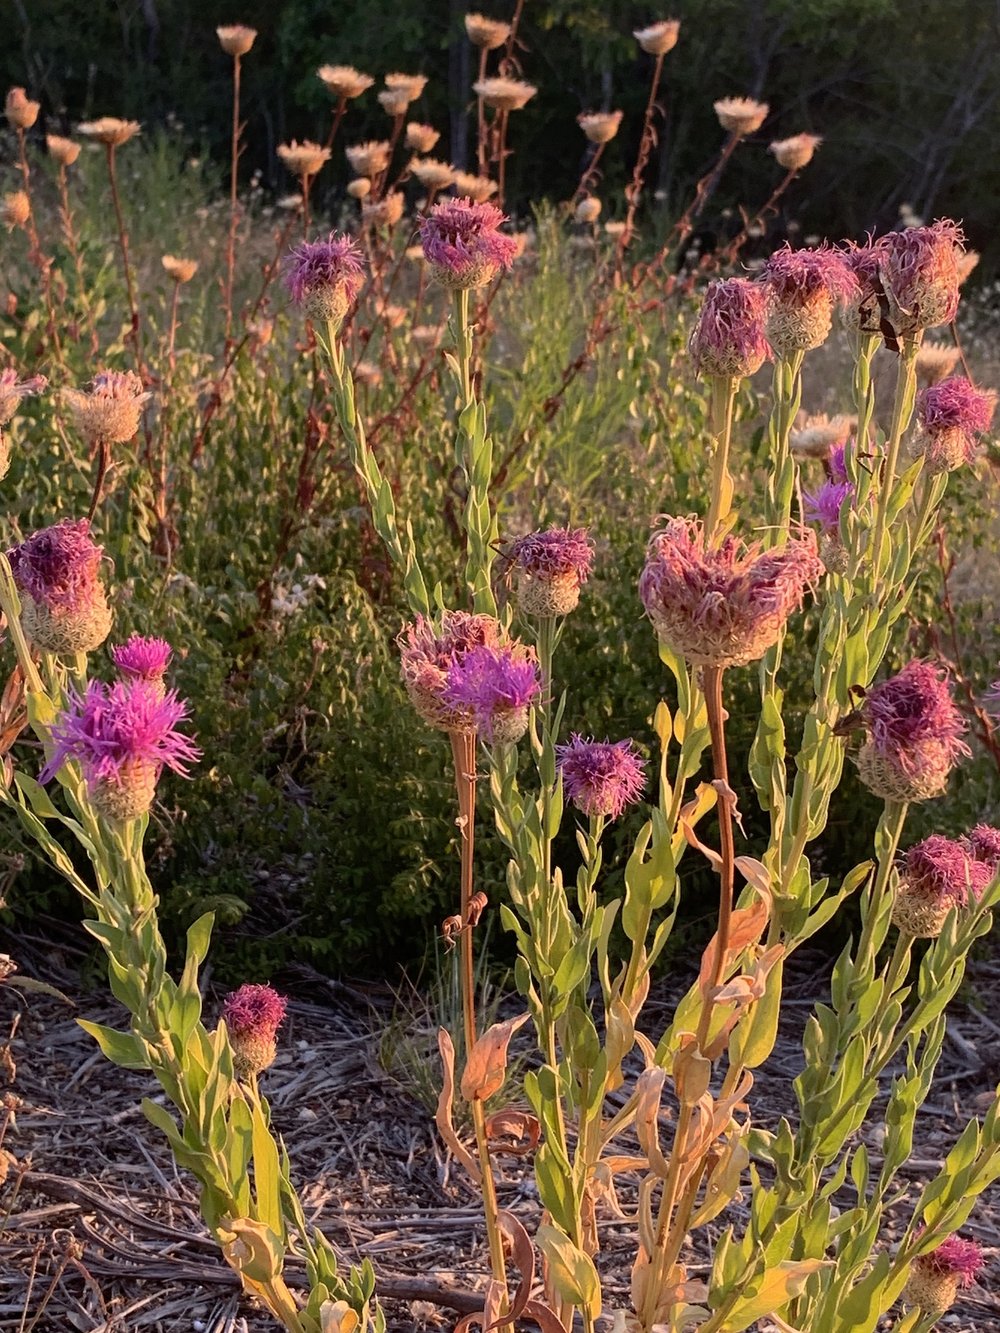  I found one  American Basketflower    plant that retains it’s pink color in late July. 